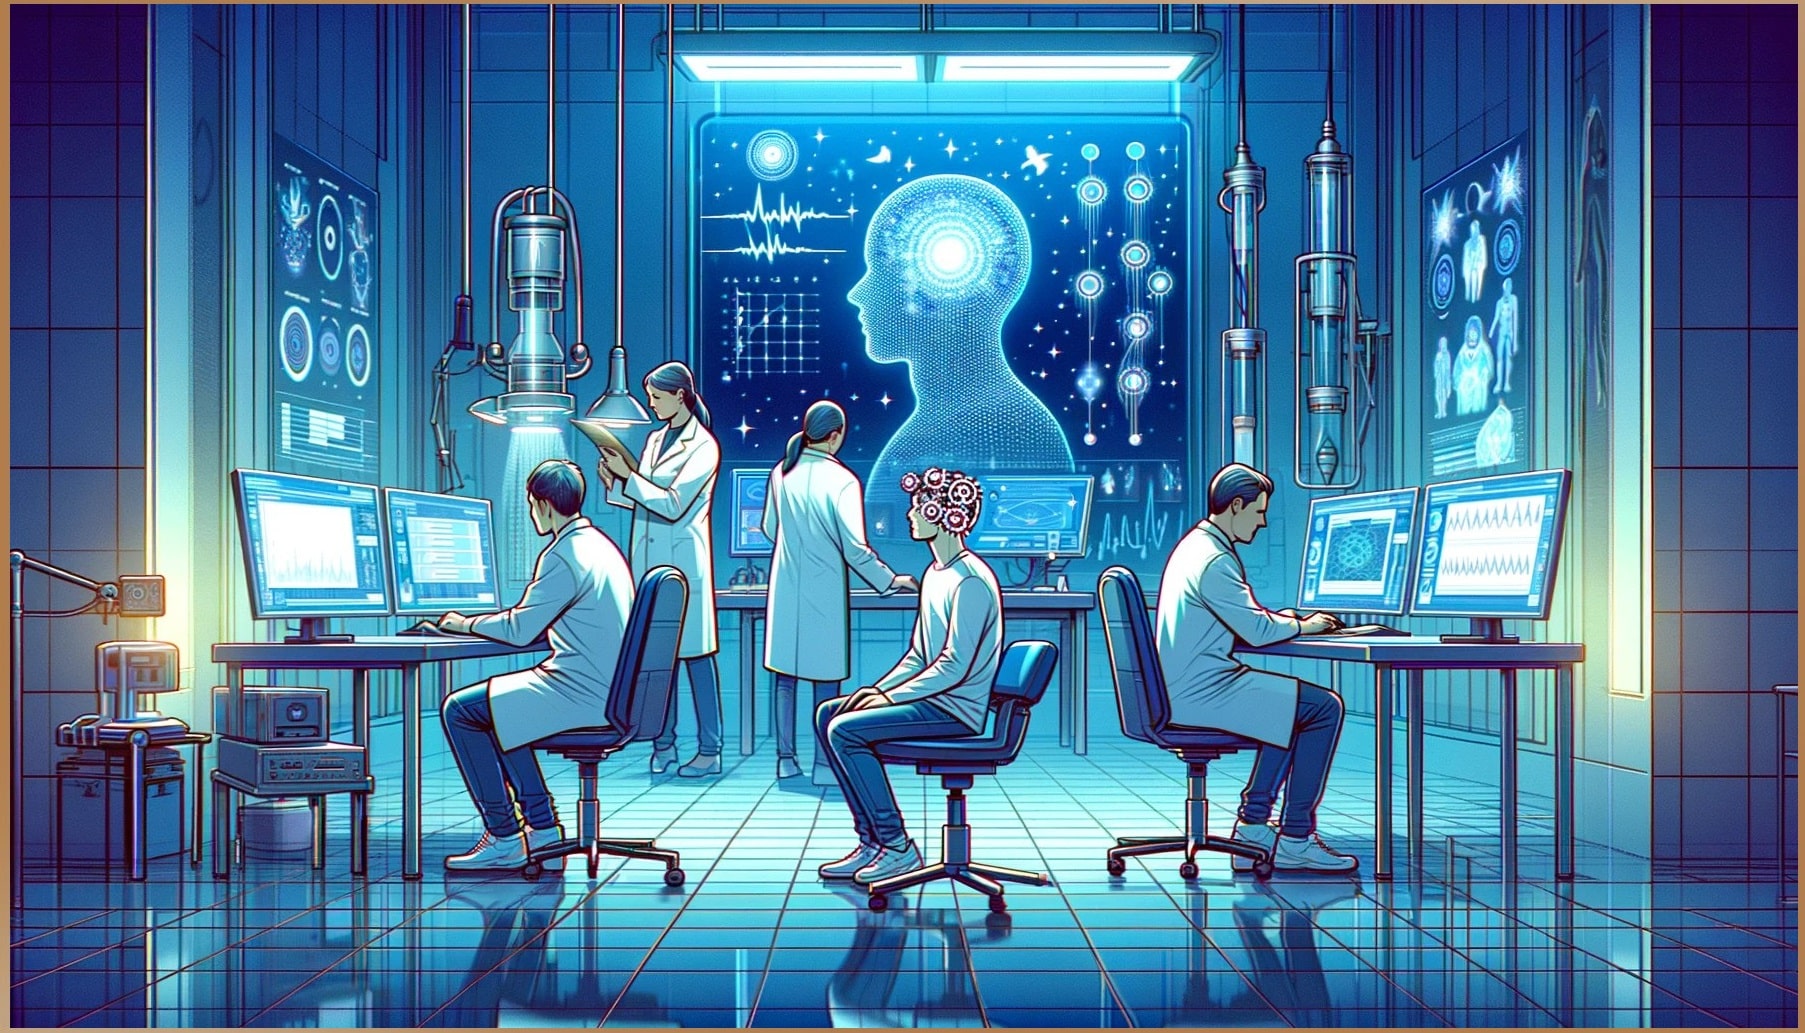 A futuristic laboratory with scientists analyzing a subject's brain activity, depicted with holographic brain imagery and advanced monitoring equipment.